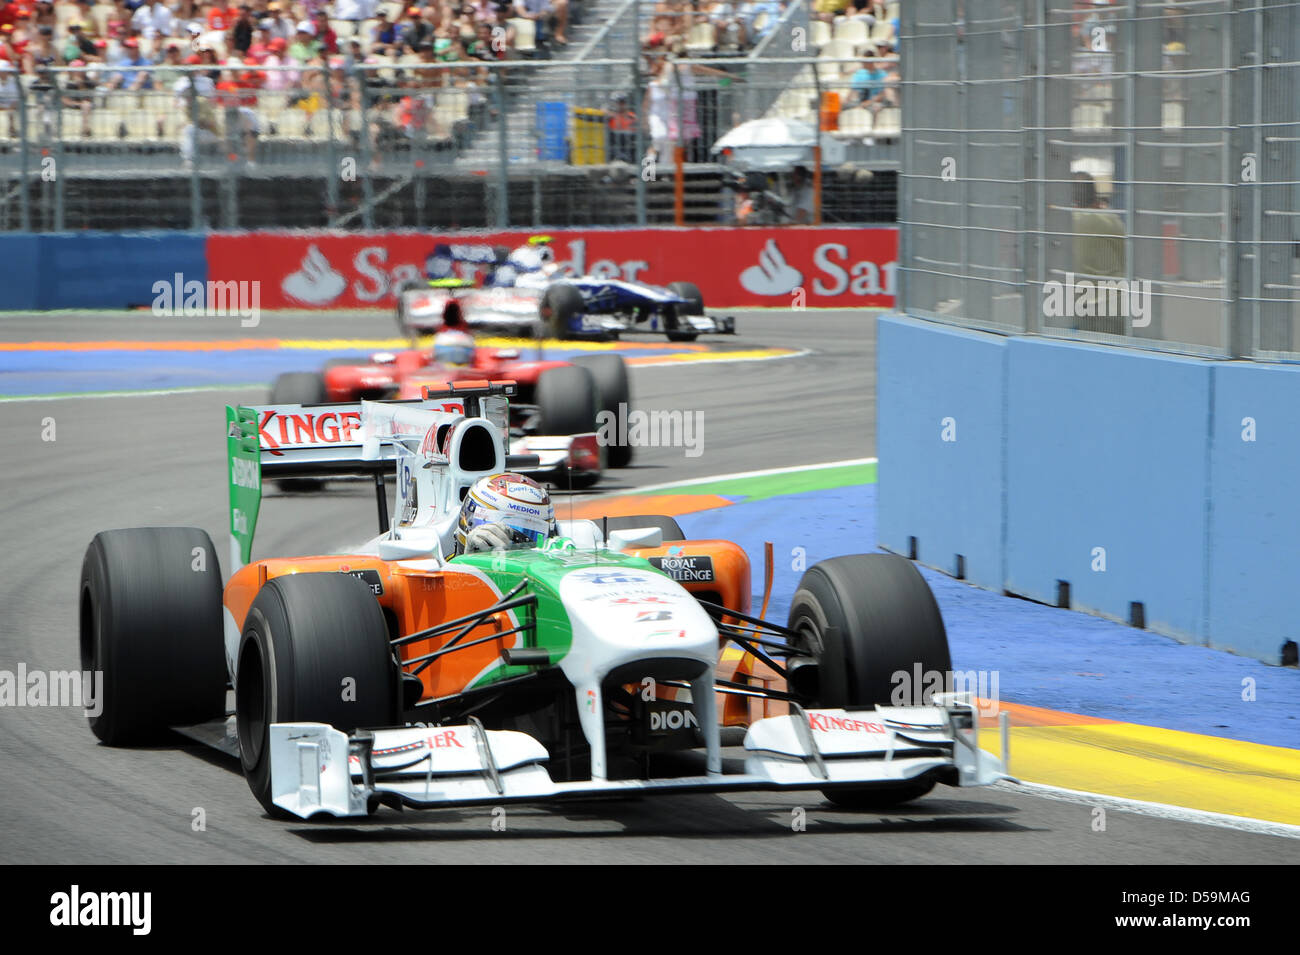 German driver Adrian Sutil of Force India at the street circuit of Valencia, Spain, 27 June 2010. The 2010 Formula 1 Grand Prix of Europe was held on 27 June. Photo: David Ebener Stock Photo